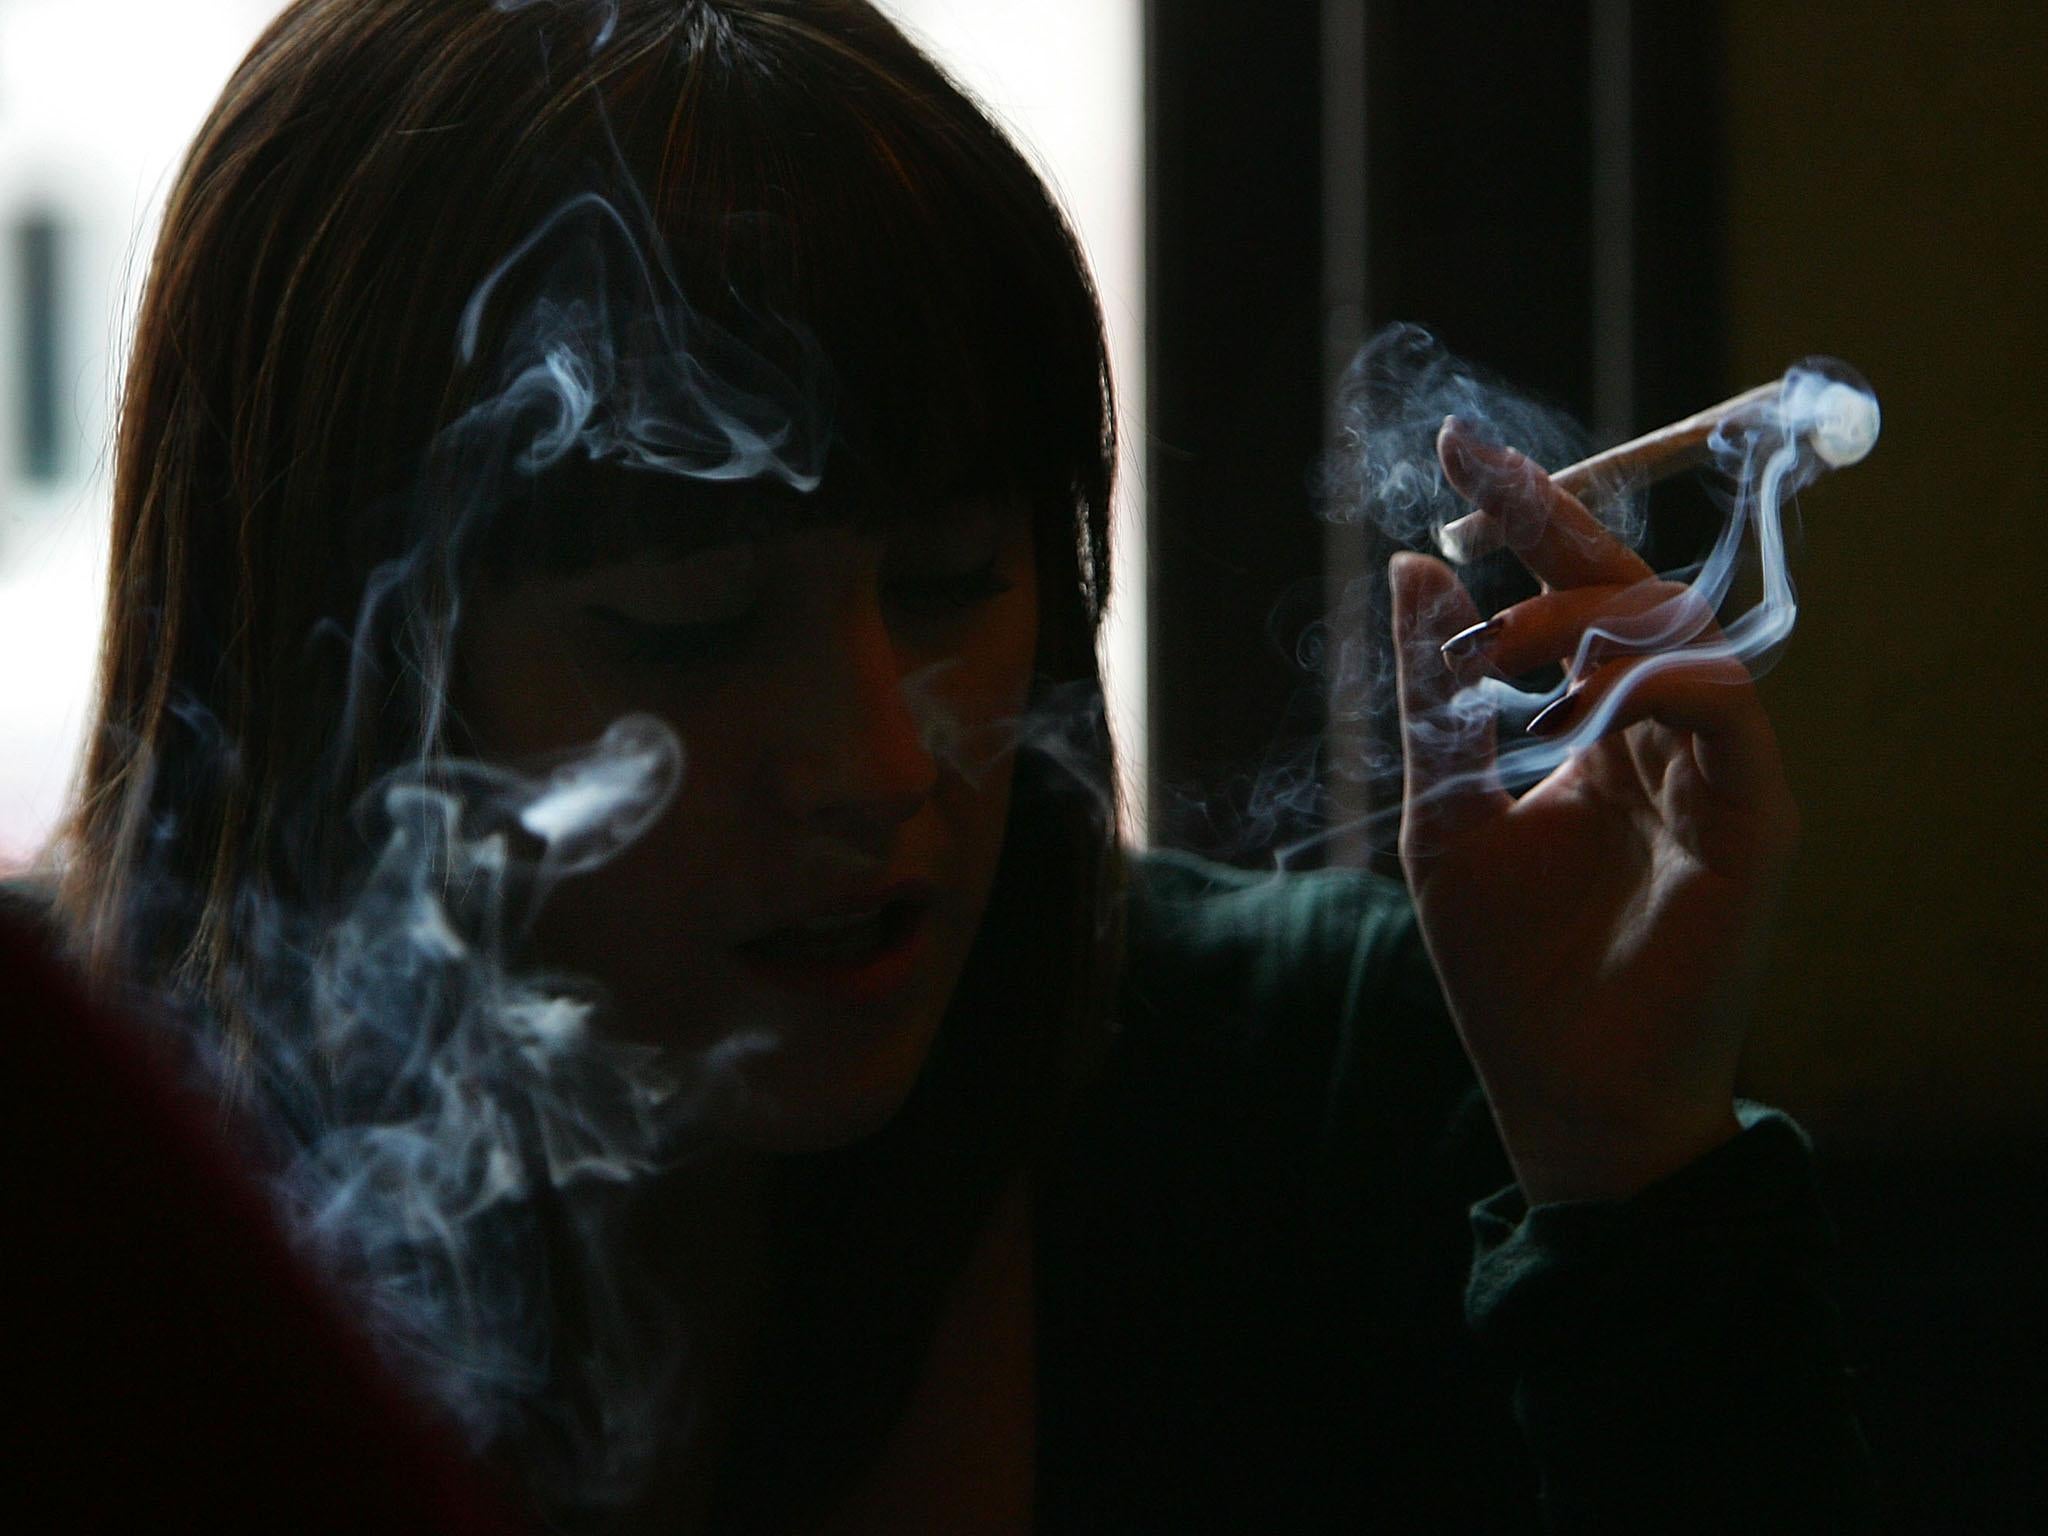 A woman smokes cannabis in Amsterdam, where the city council recently voted to ban smoking marijuana in public areas